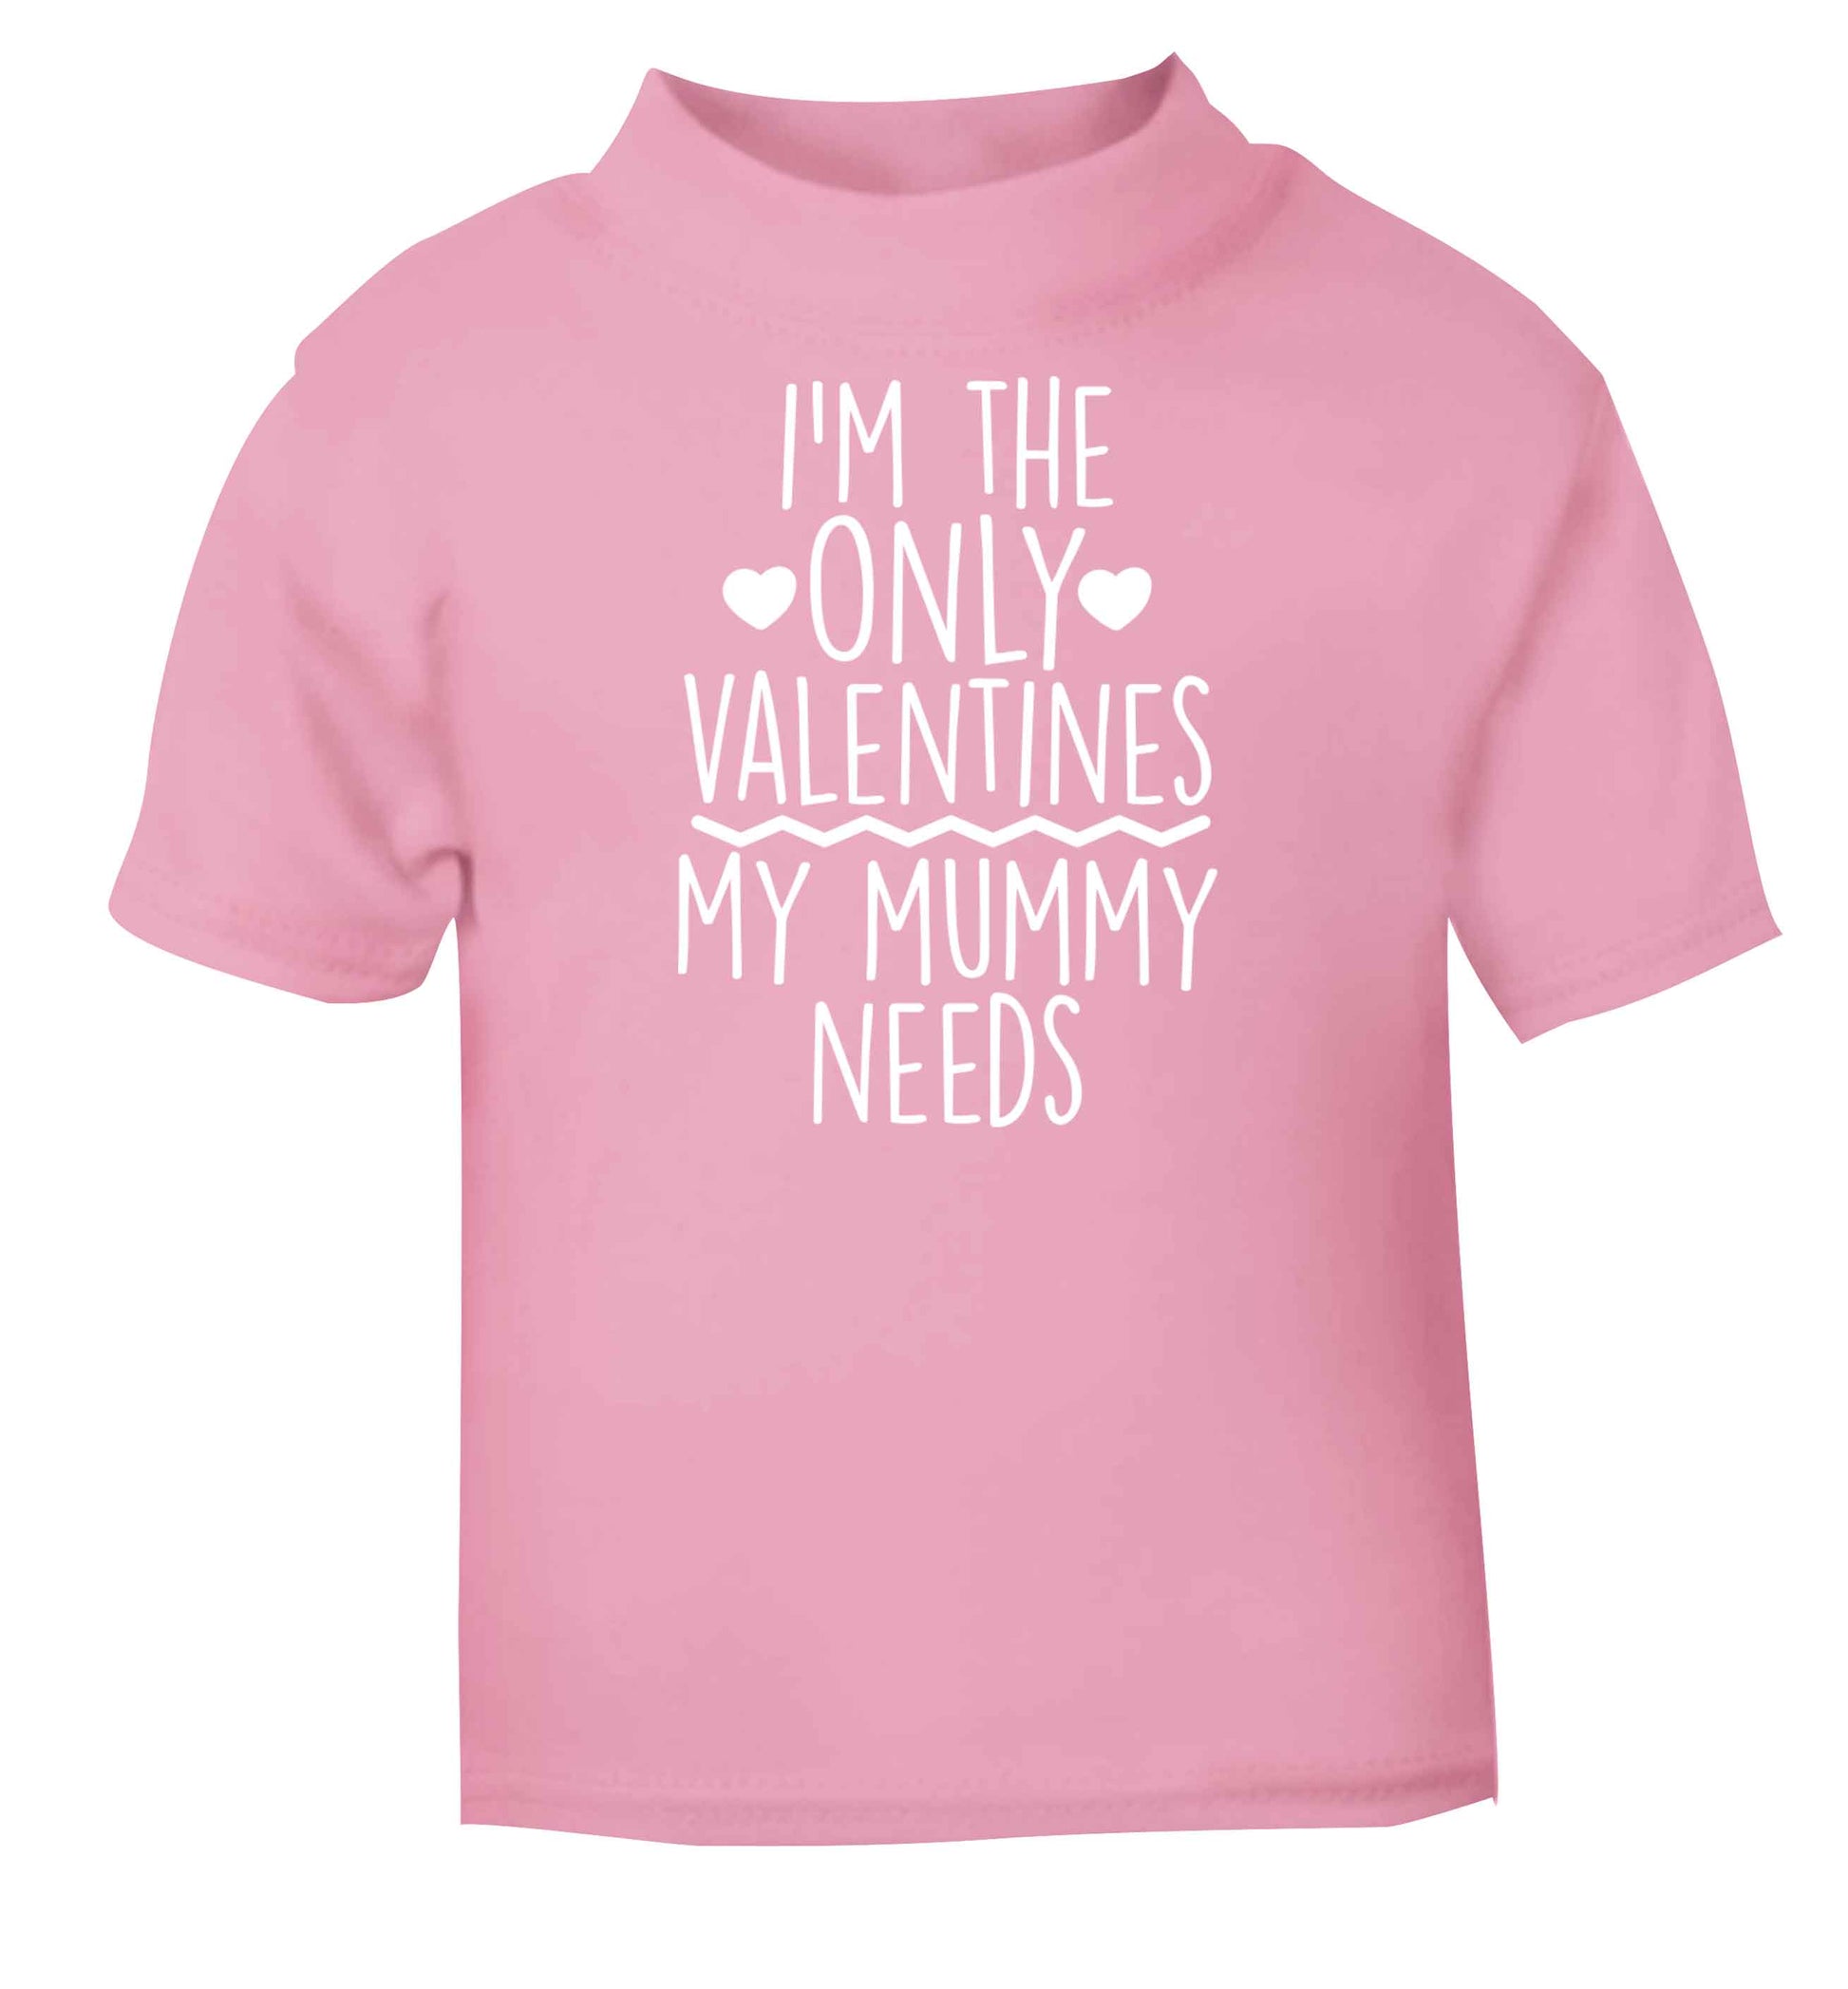 I'm the only valentines my mummy needs light pink baby toddler Tshirt 2 Years